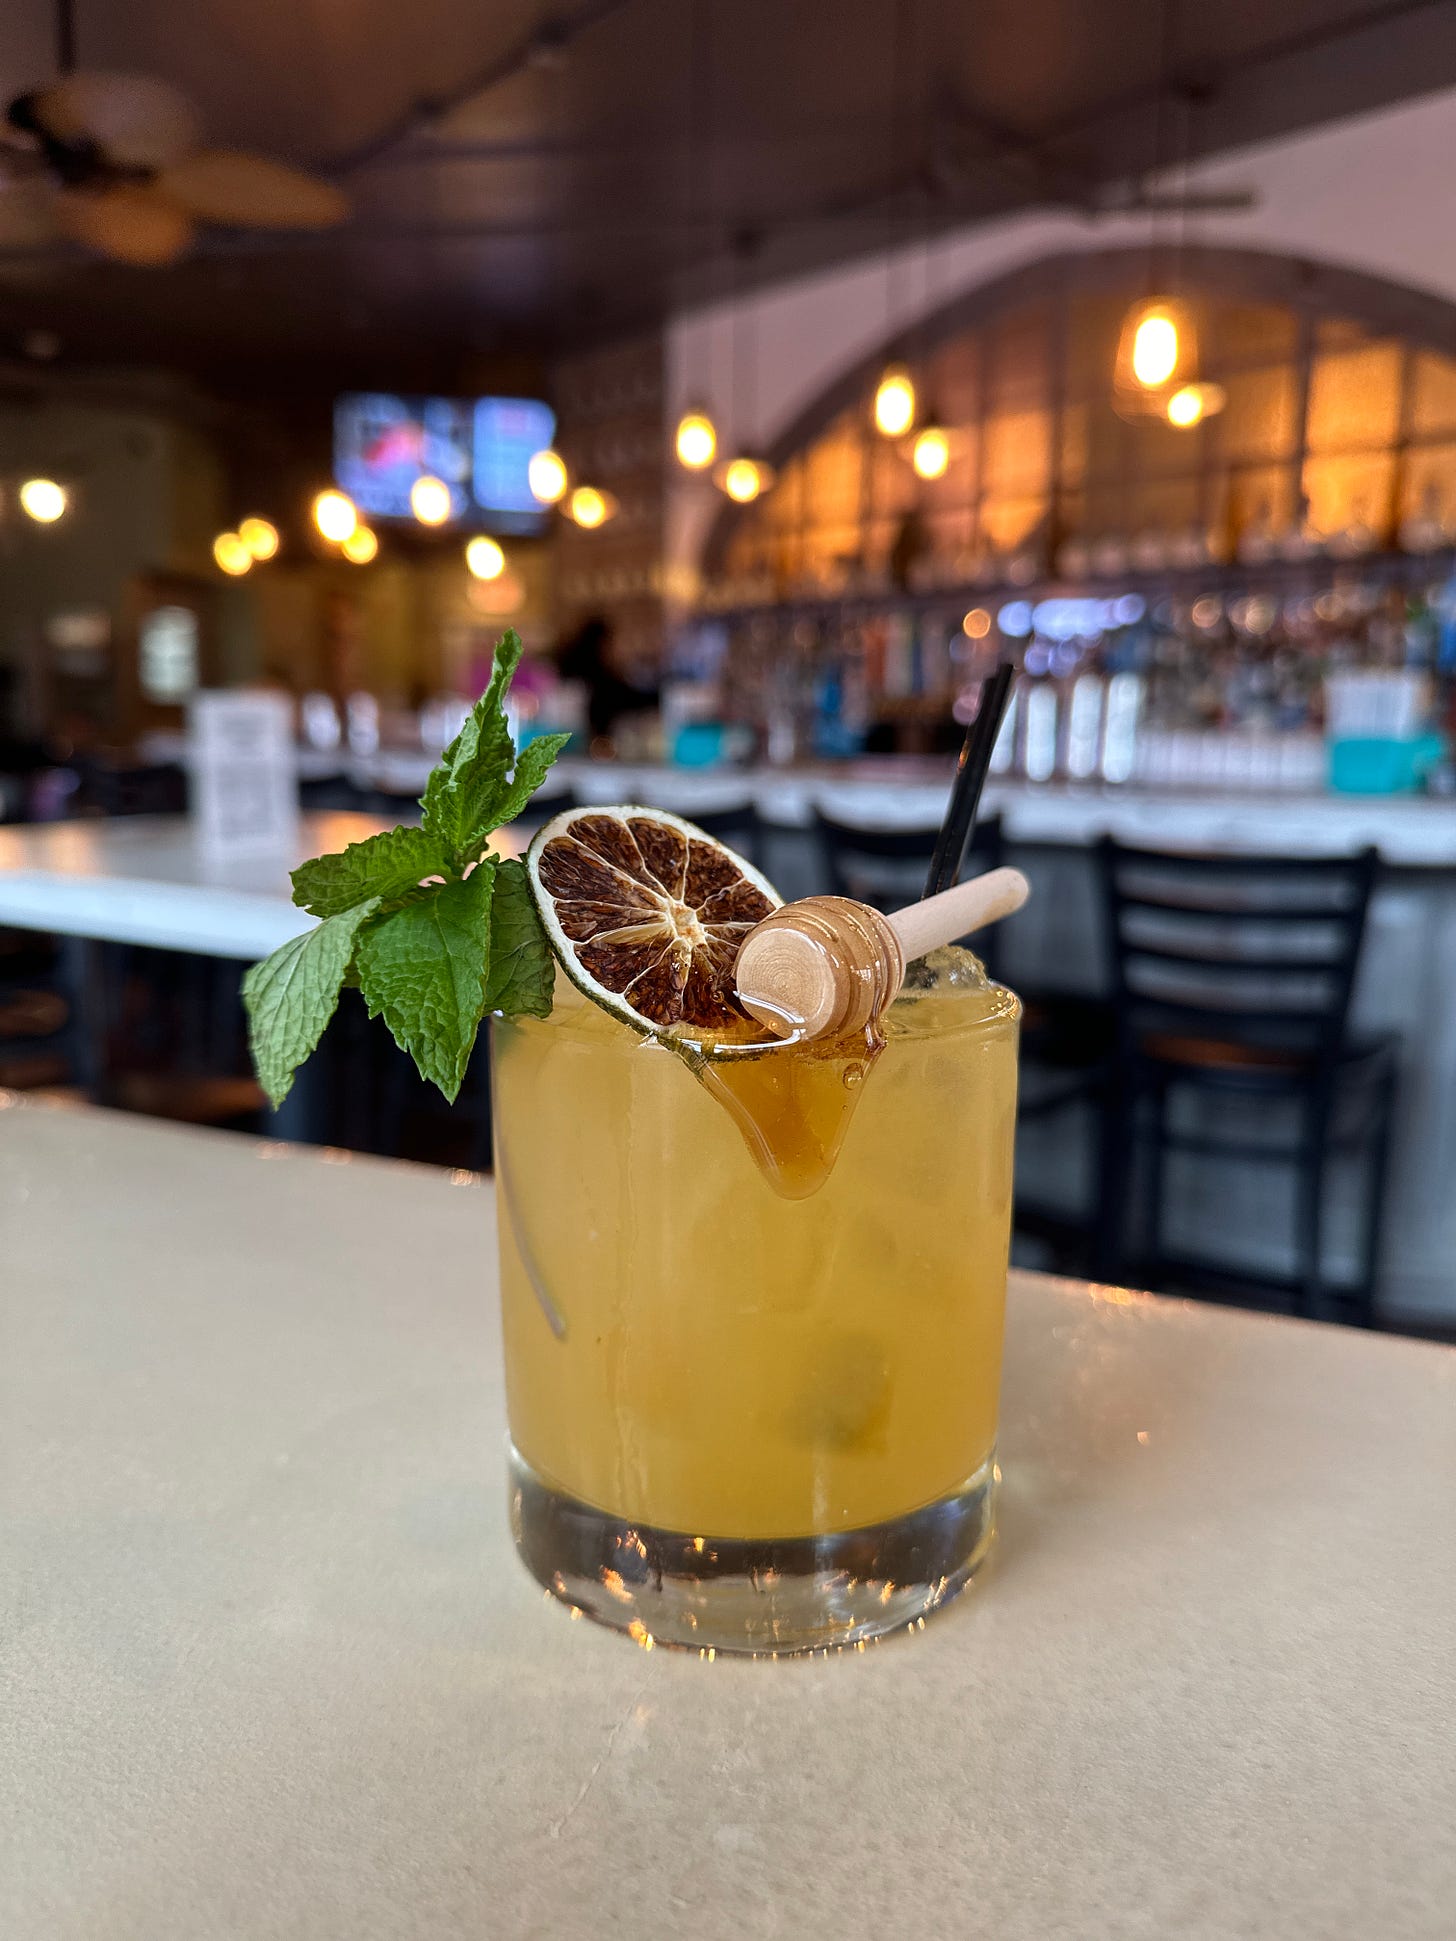 A honey whisky drink that is set against the backdrop of a restaurant bar. The drink is yellow in a whiskey glass, embellished with mint leaves, a slice of dried lime, and mini honey dipper. Honey can be seen flowing down the front of the glass.